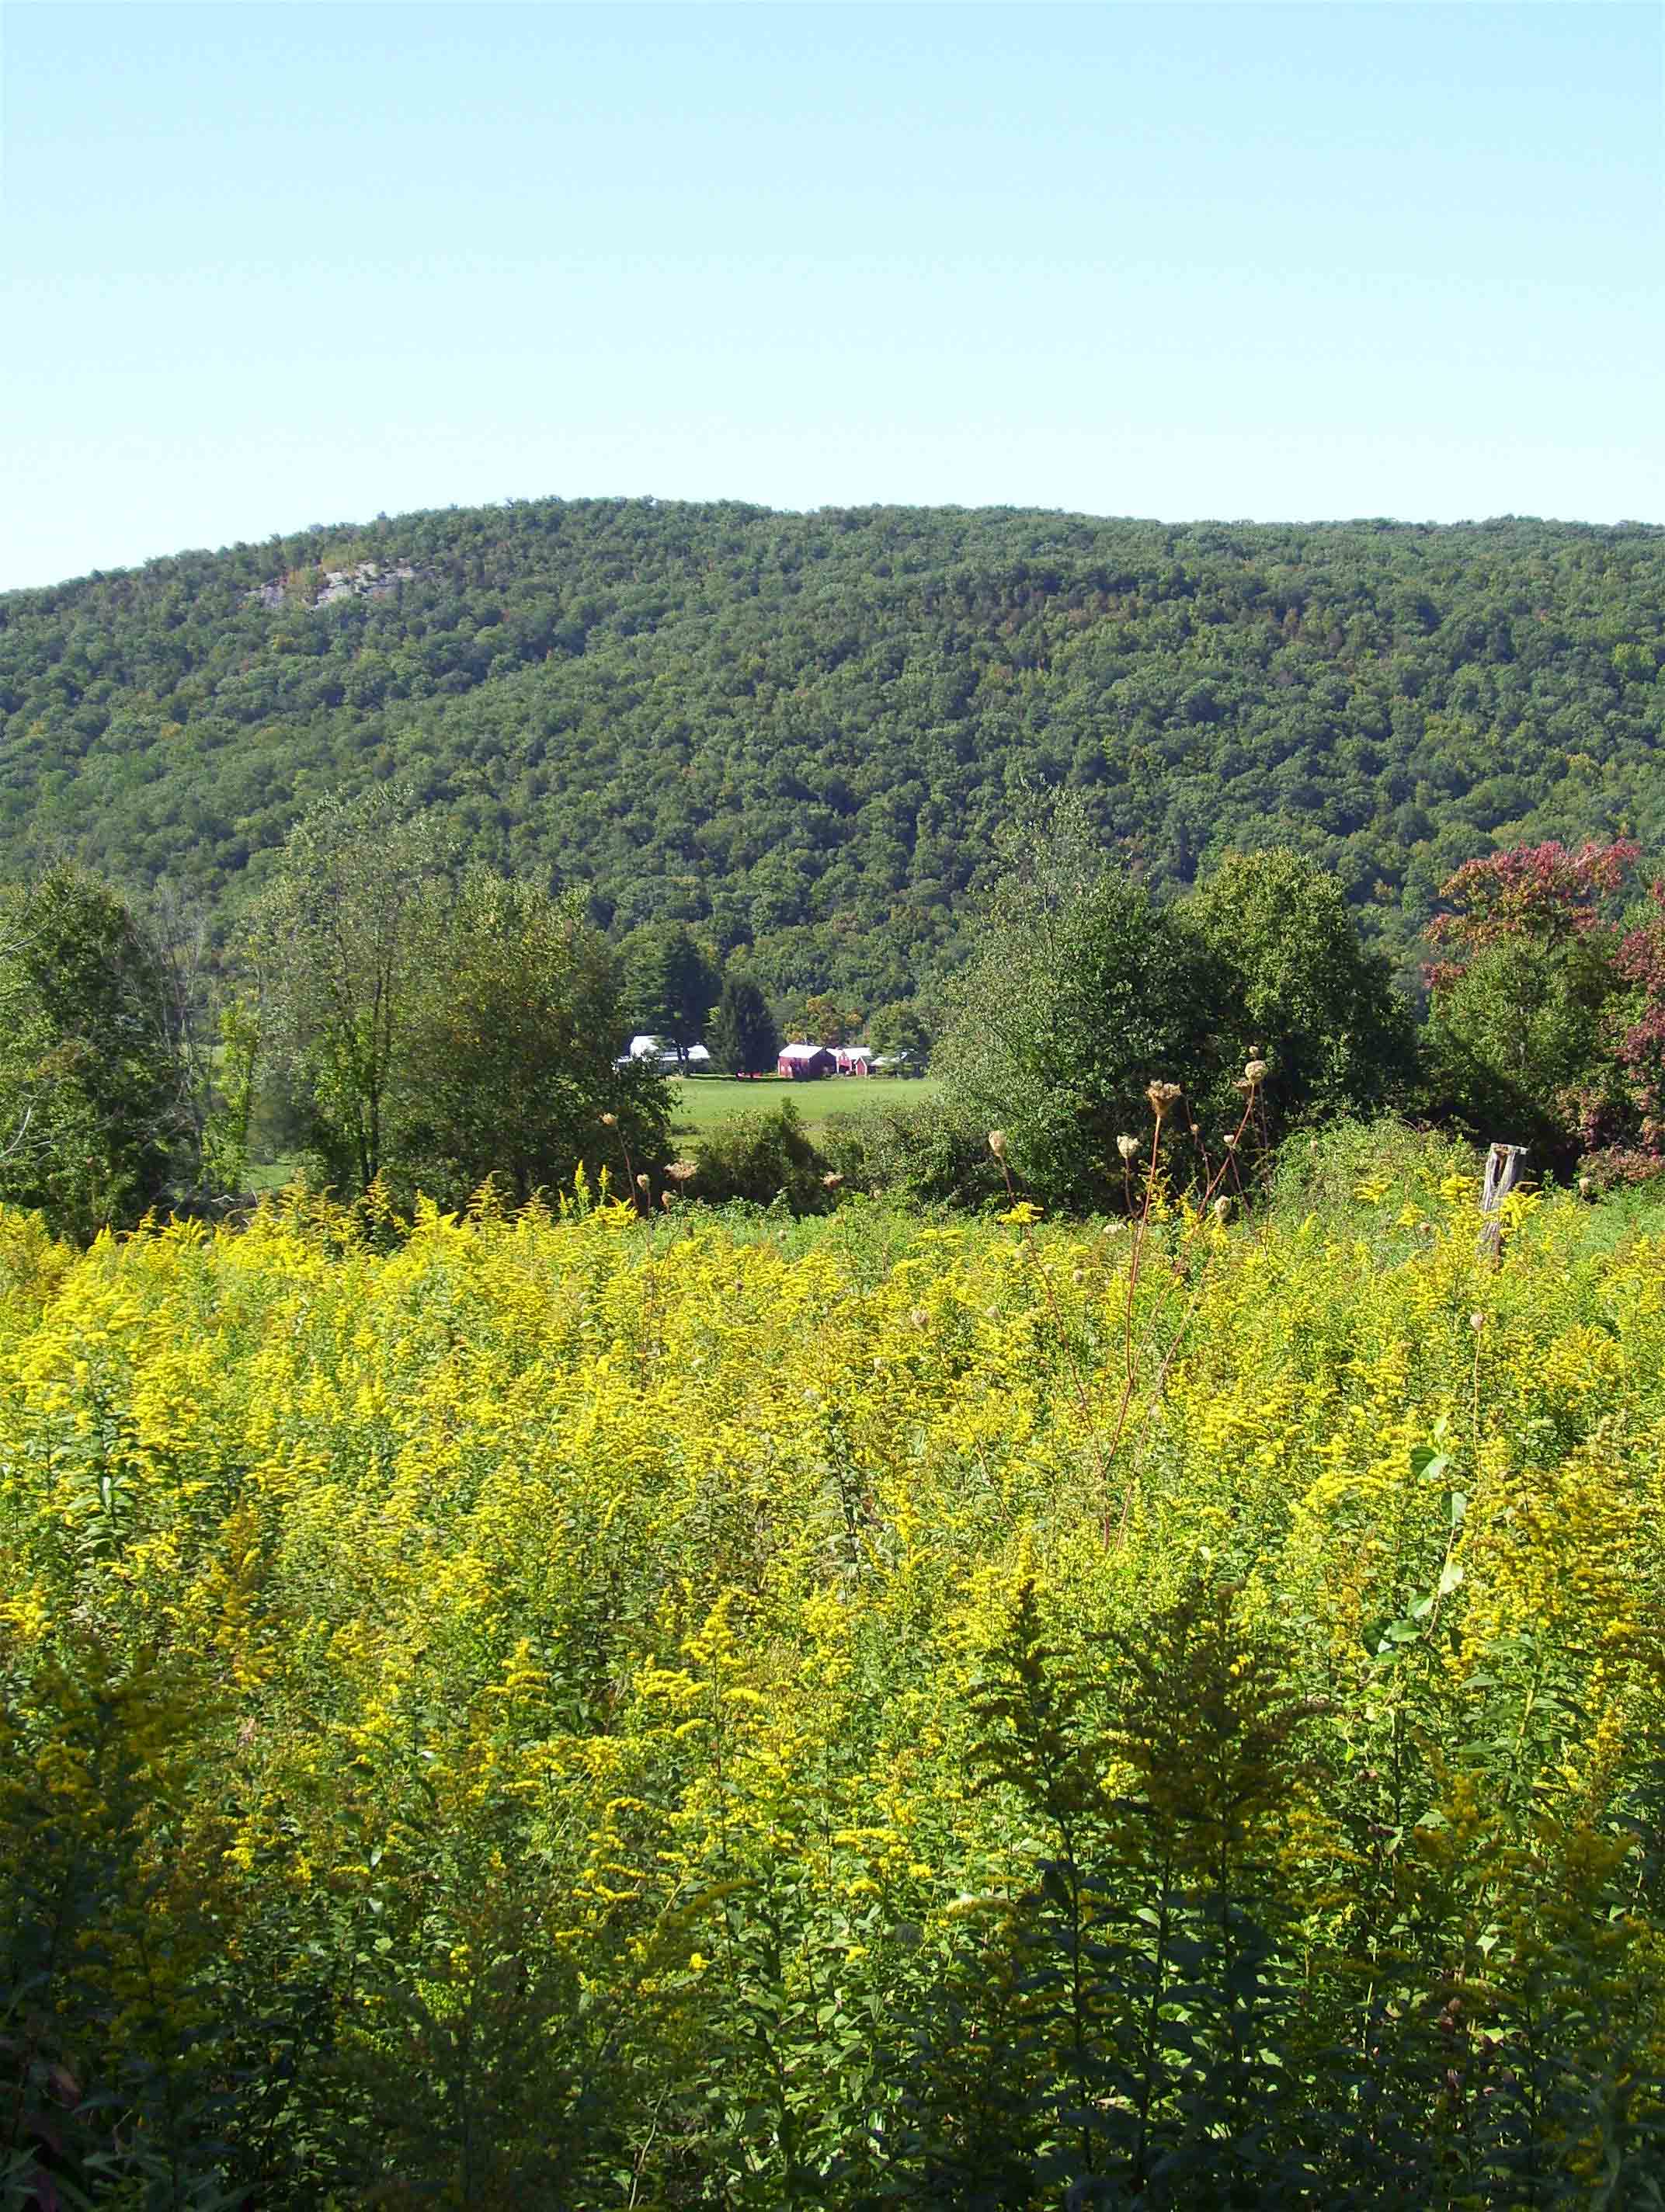 View to the west across a field of goldenrod. Taken at approx. mm 1.6.  Courtesy dlcul@conncoll.edu